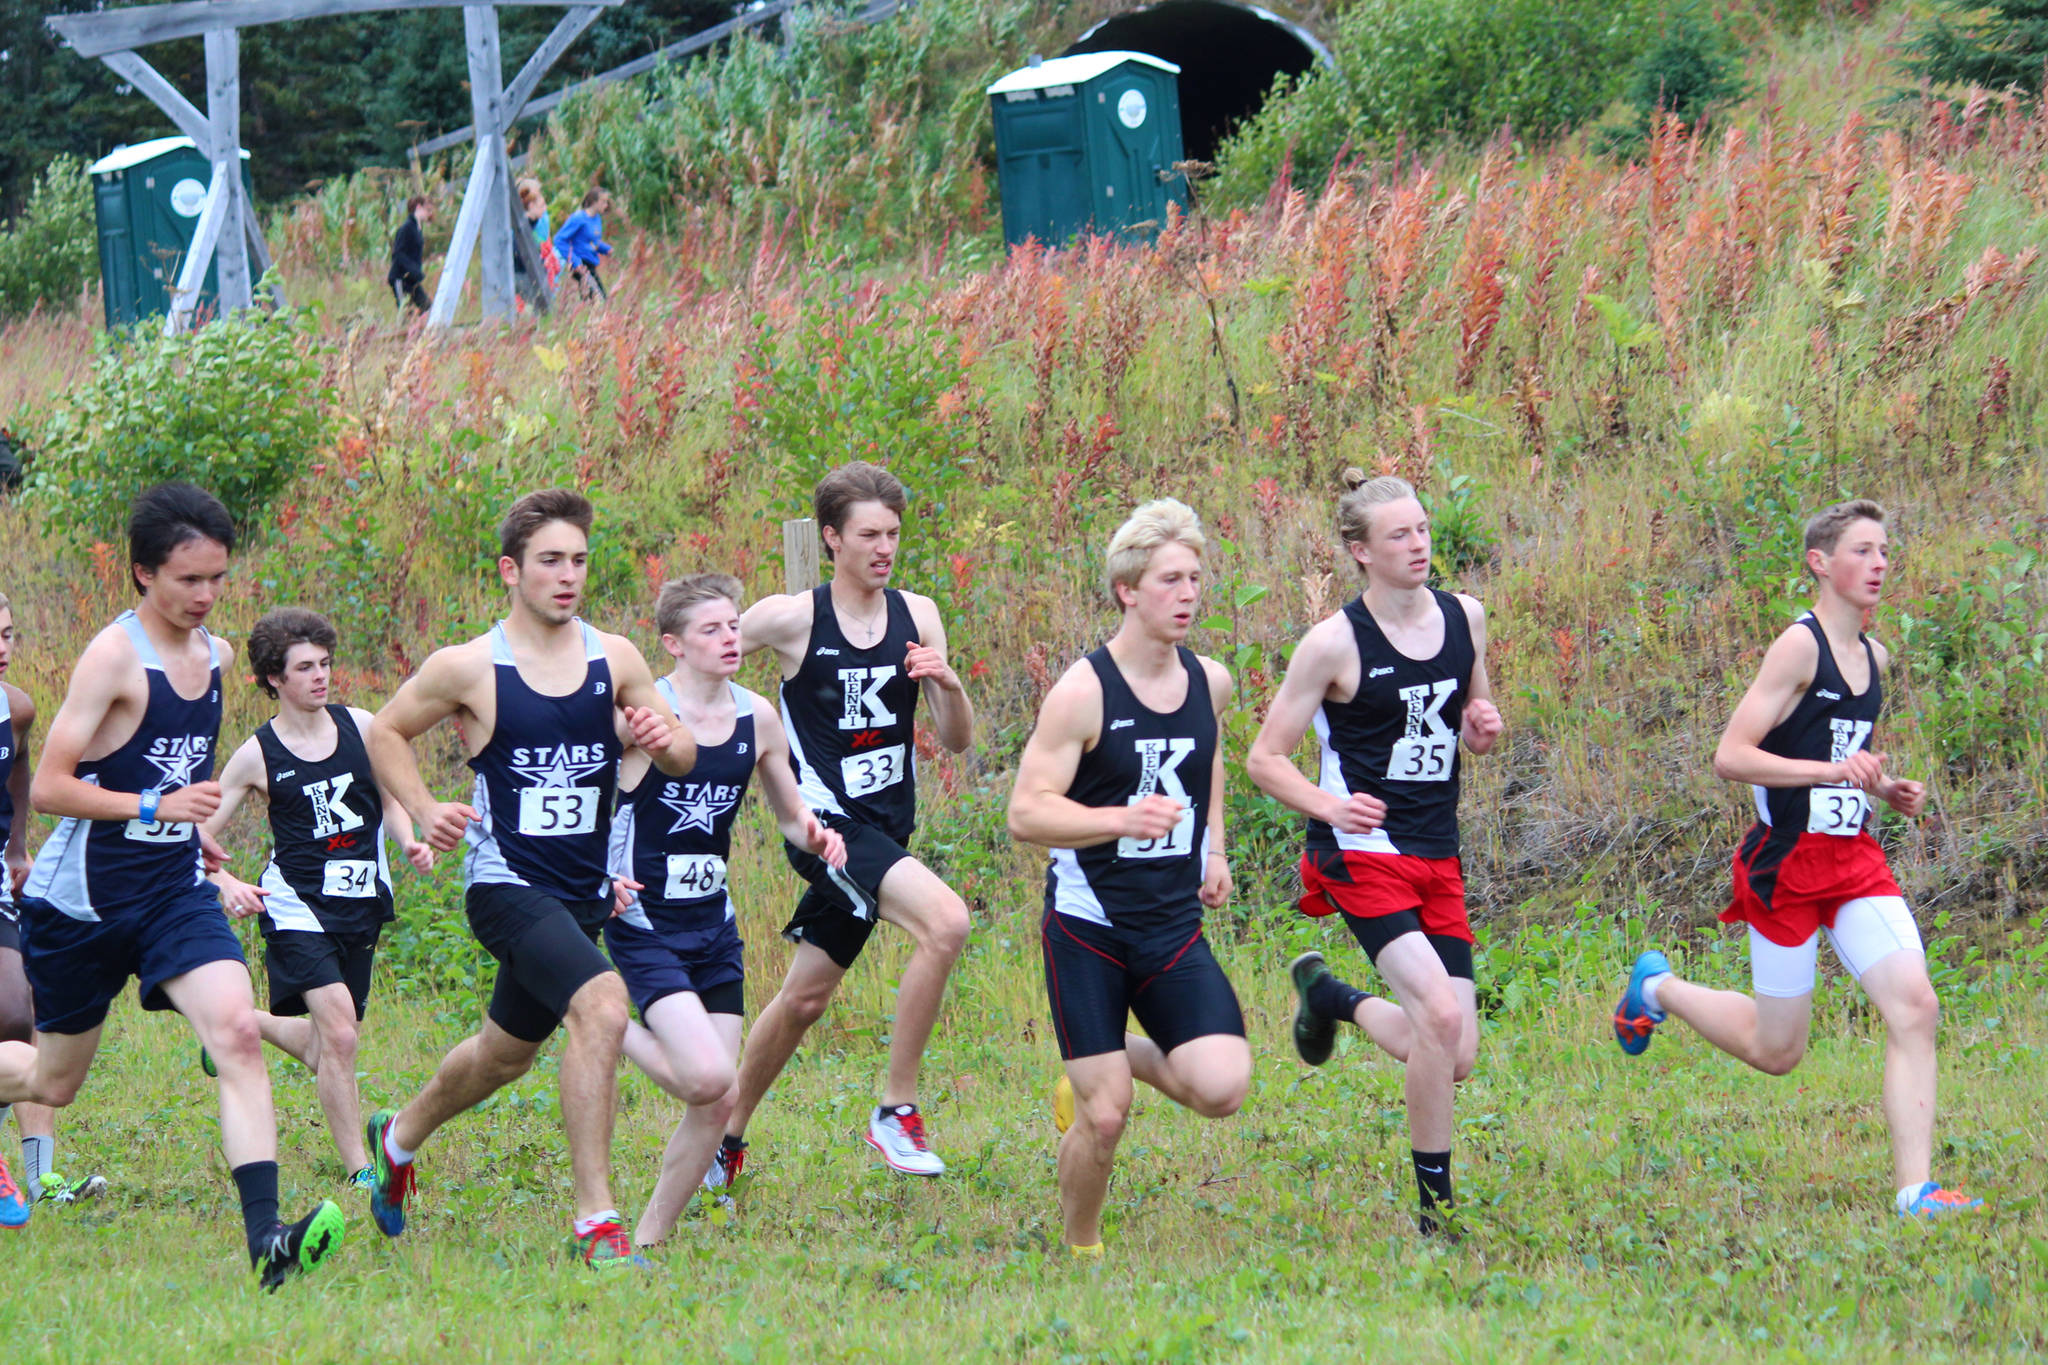 Varsity Cross Country runners take off from the starting line during the Kenai Peninsula Borough Cross Country Running Championships on Tuesday, Sept. 12, 2017 at the Lookout Mountain Trails near Homer, Alaska. (Photo by Megan Pacer/Homer News)